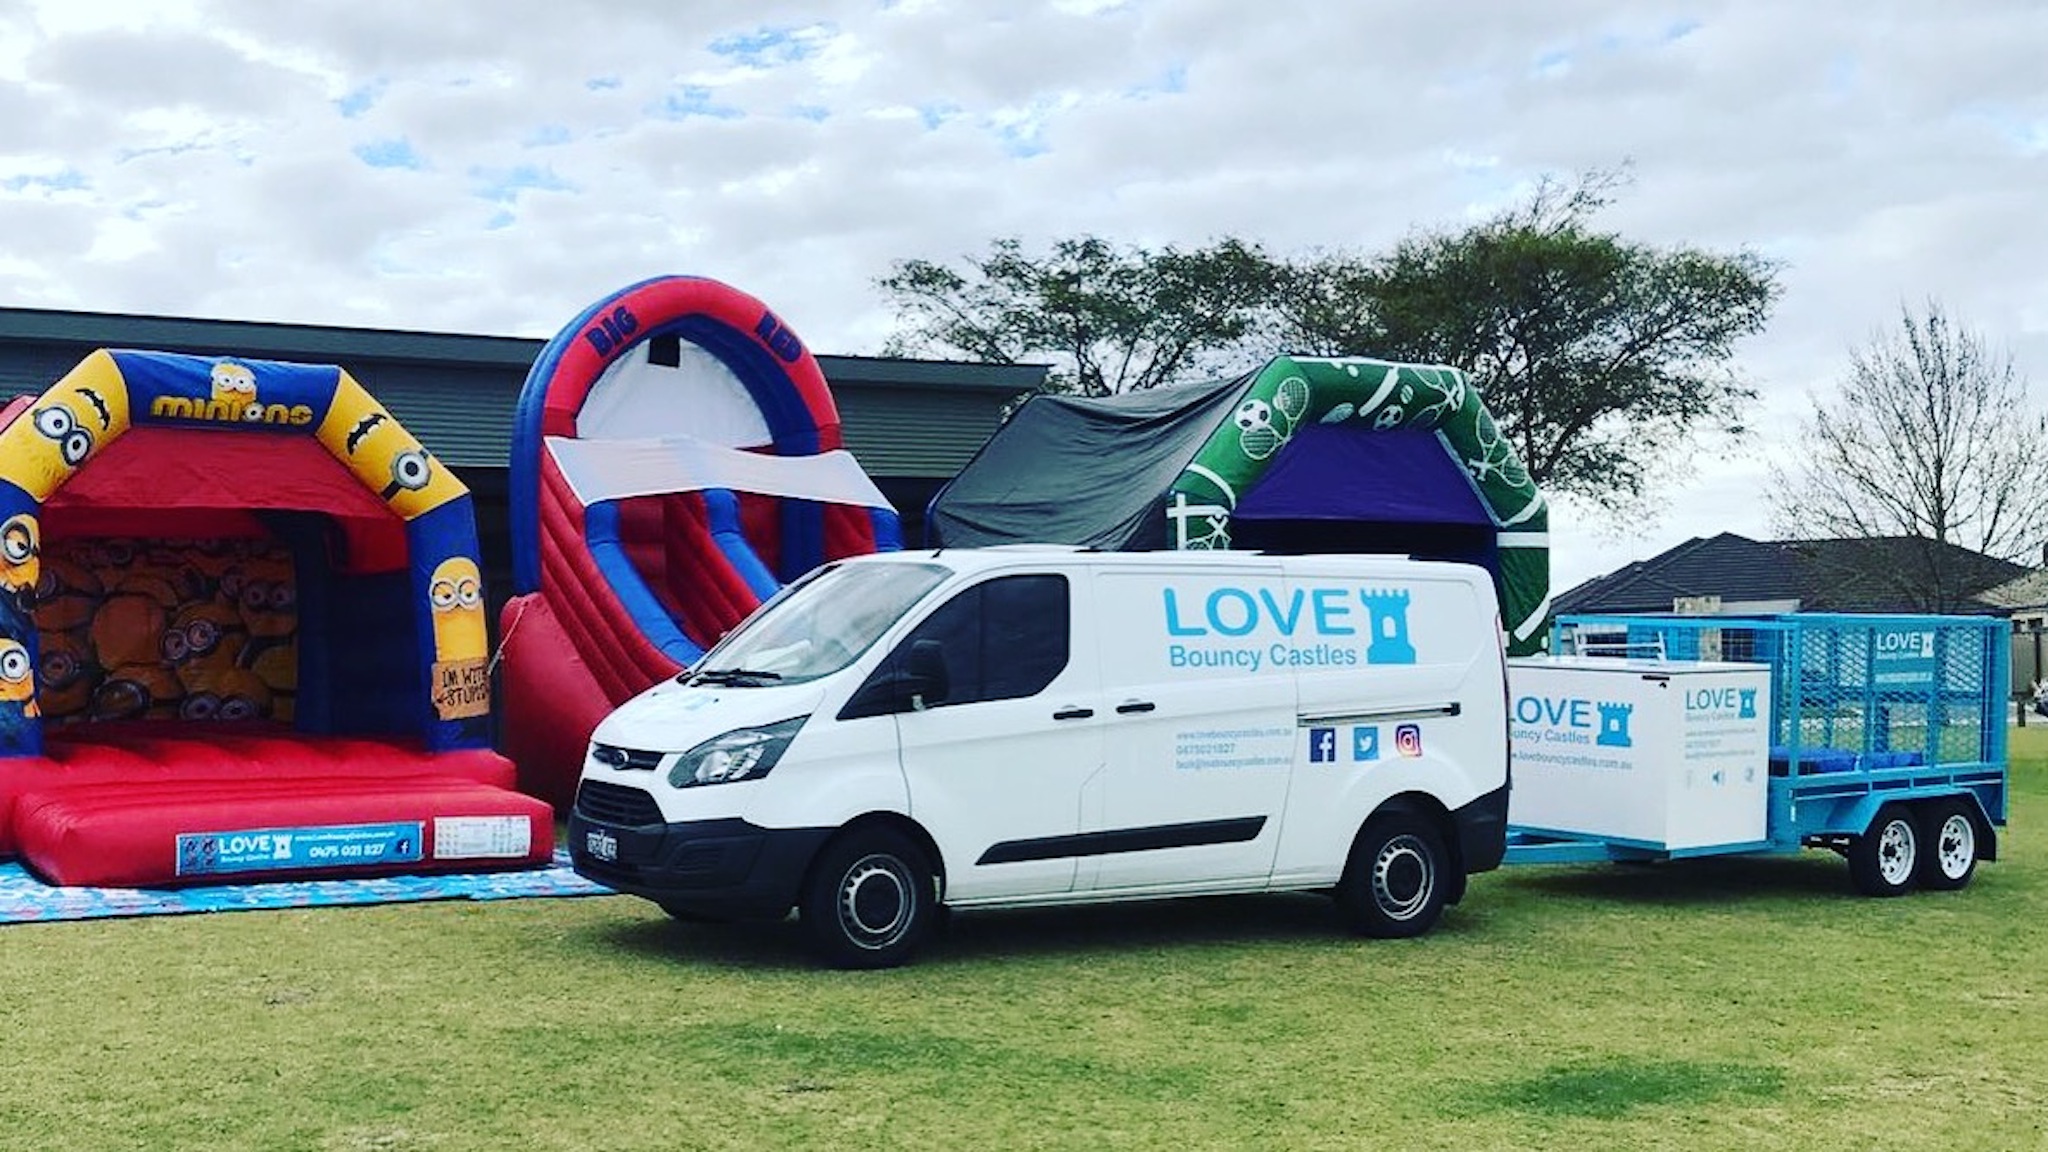 Copy of Sports Day Event With Bouncy Castles Set Up In Perth